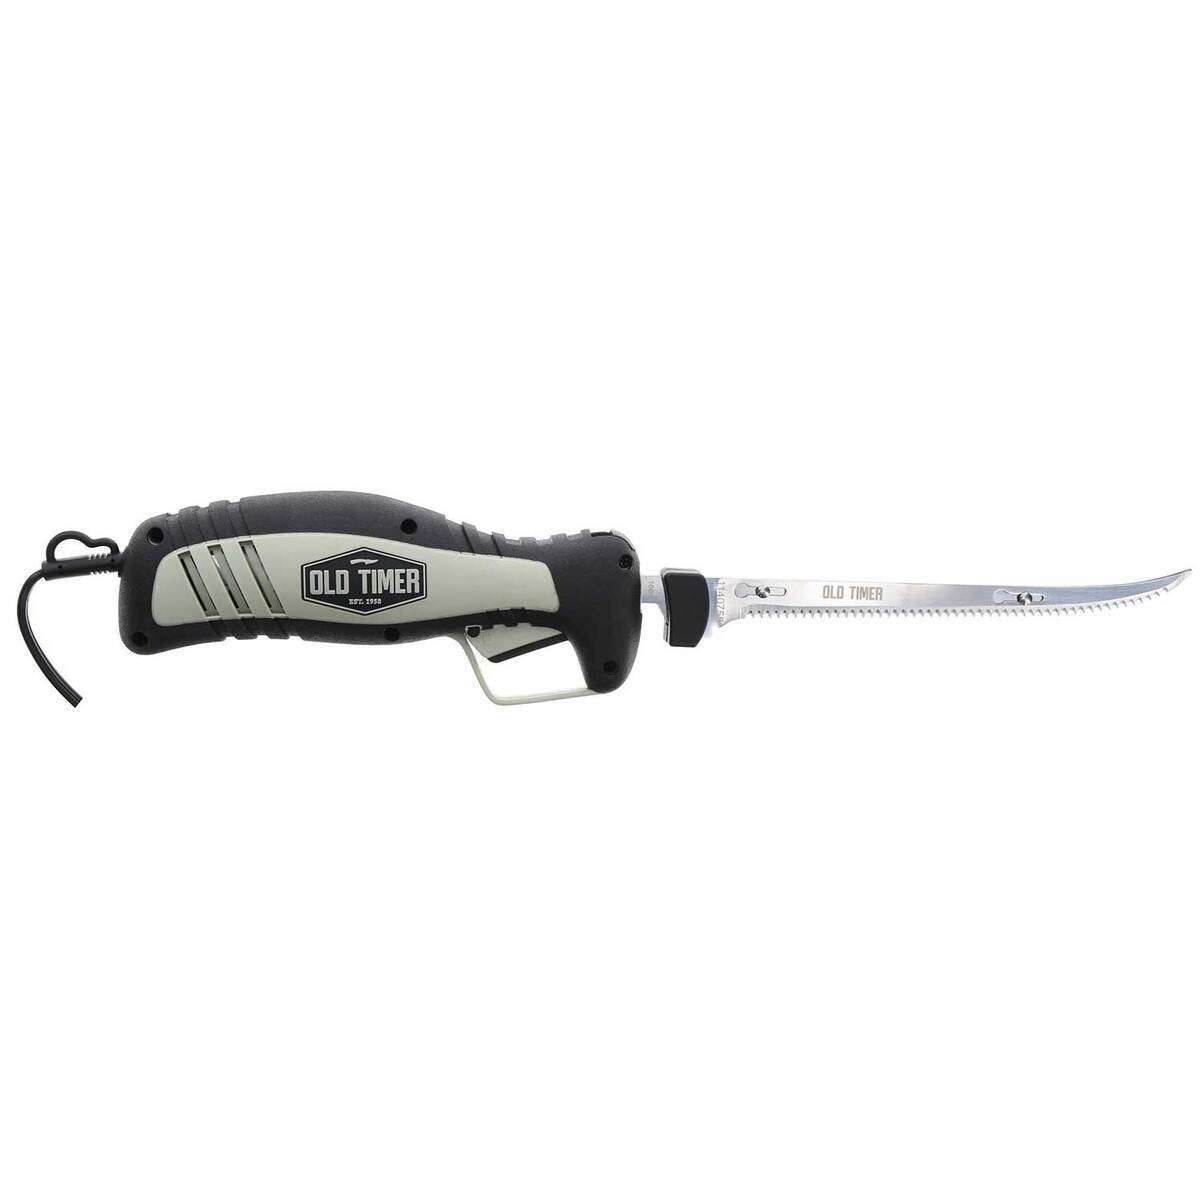 Old Timer 8 Blade Electric Fillet Knife - Rechargeable Lithium